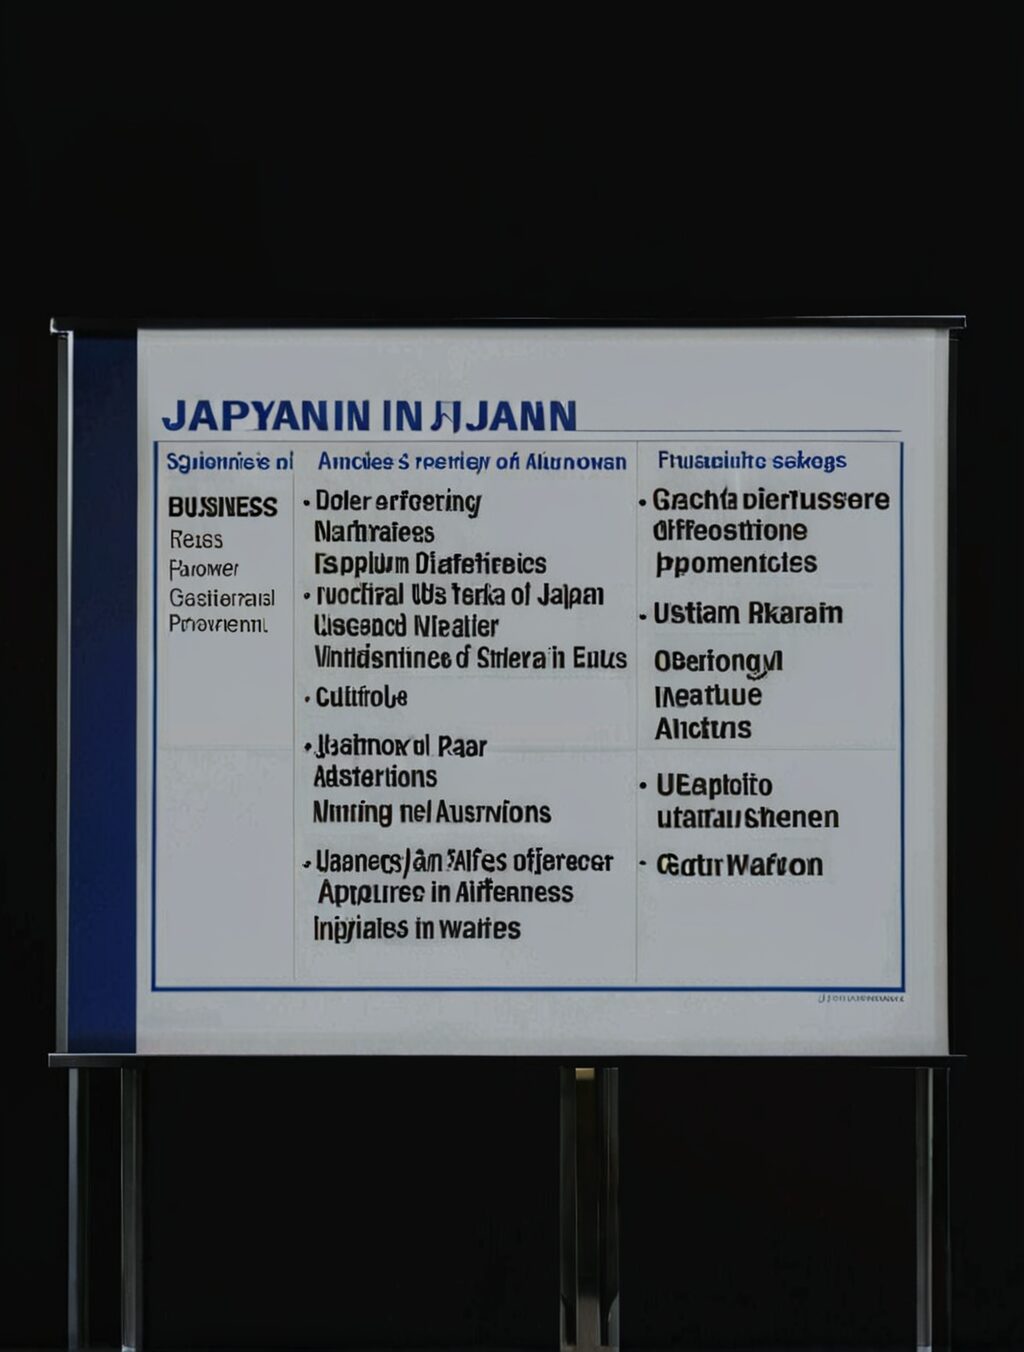 cultural differences between us and japan in business